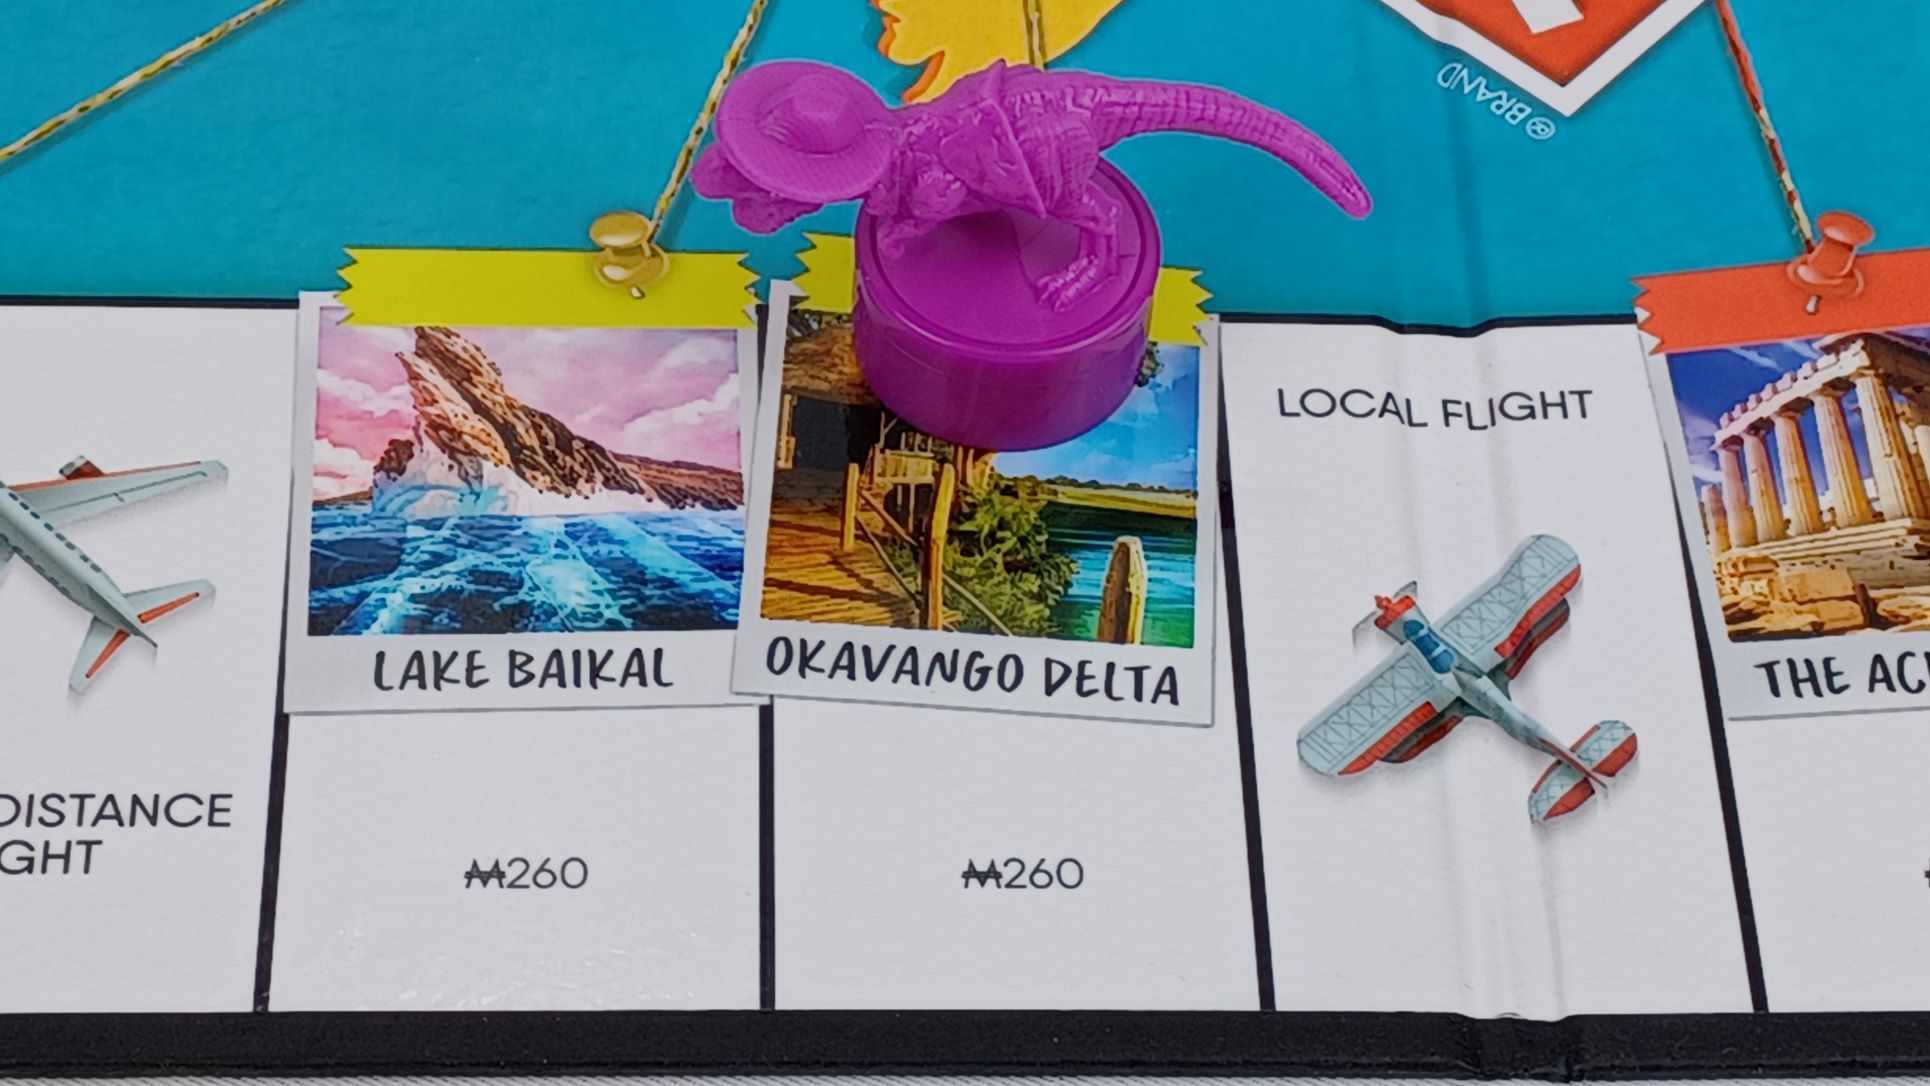 Complete Travel Goal in Monopoly Travel World Tour